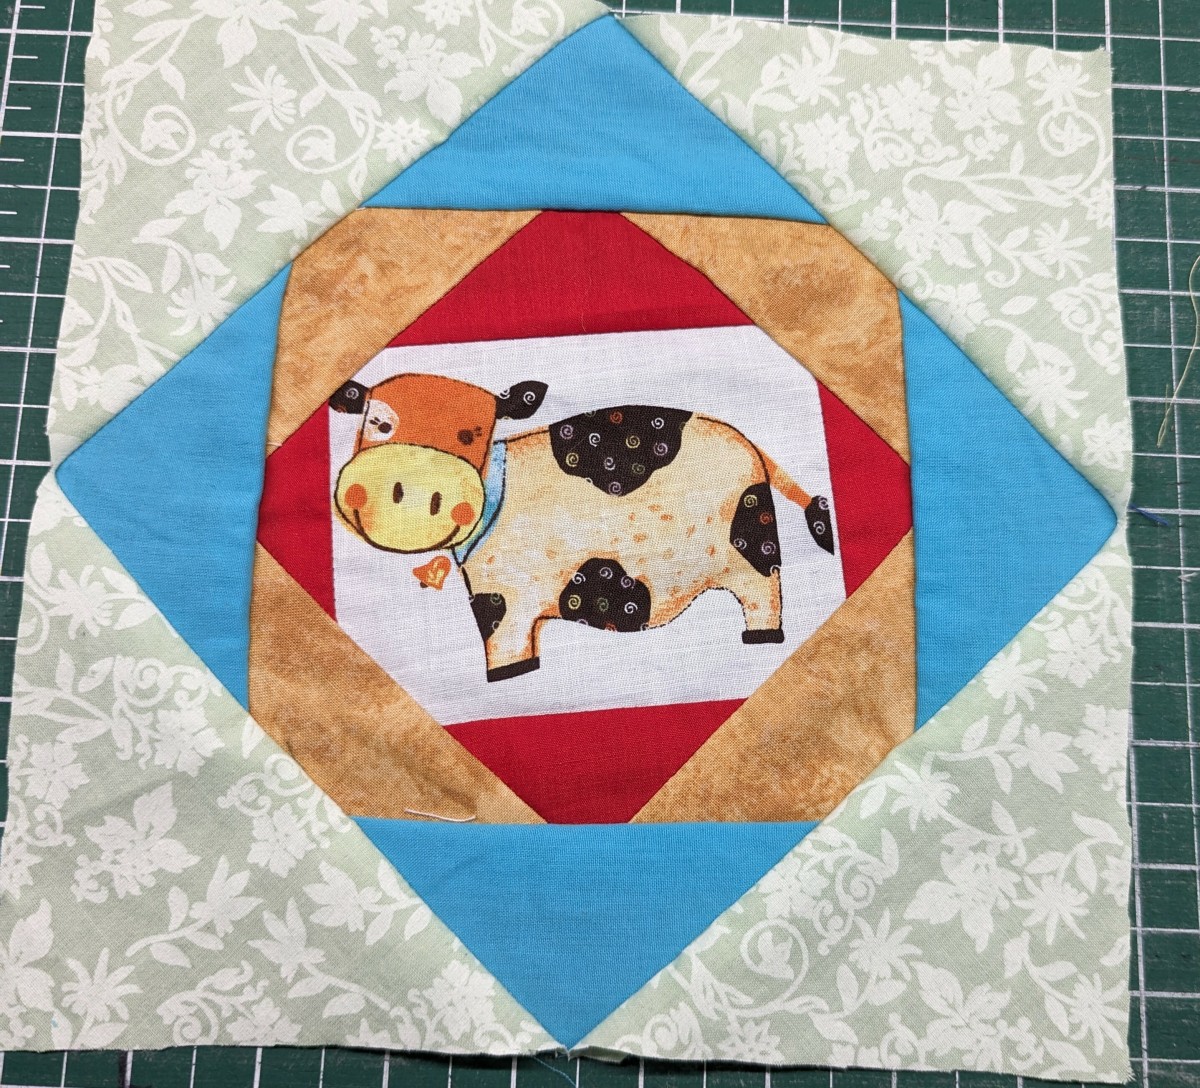 Quilting - How to Make Simple Squares From Scraps